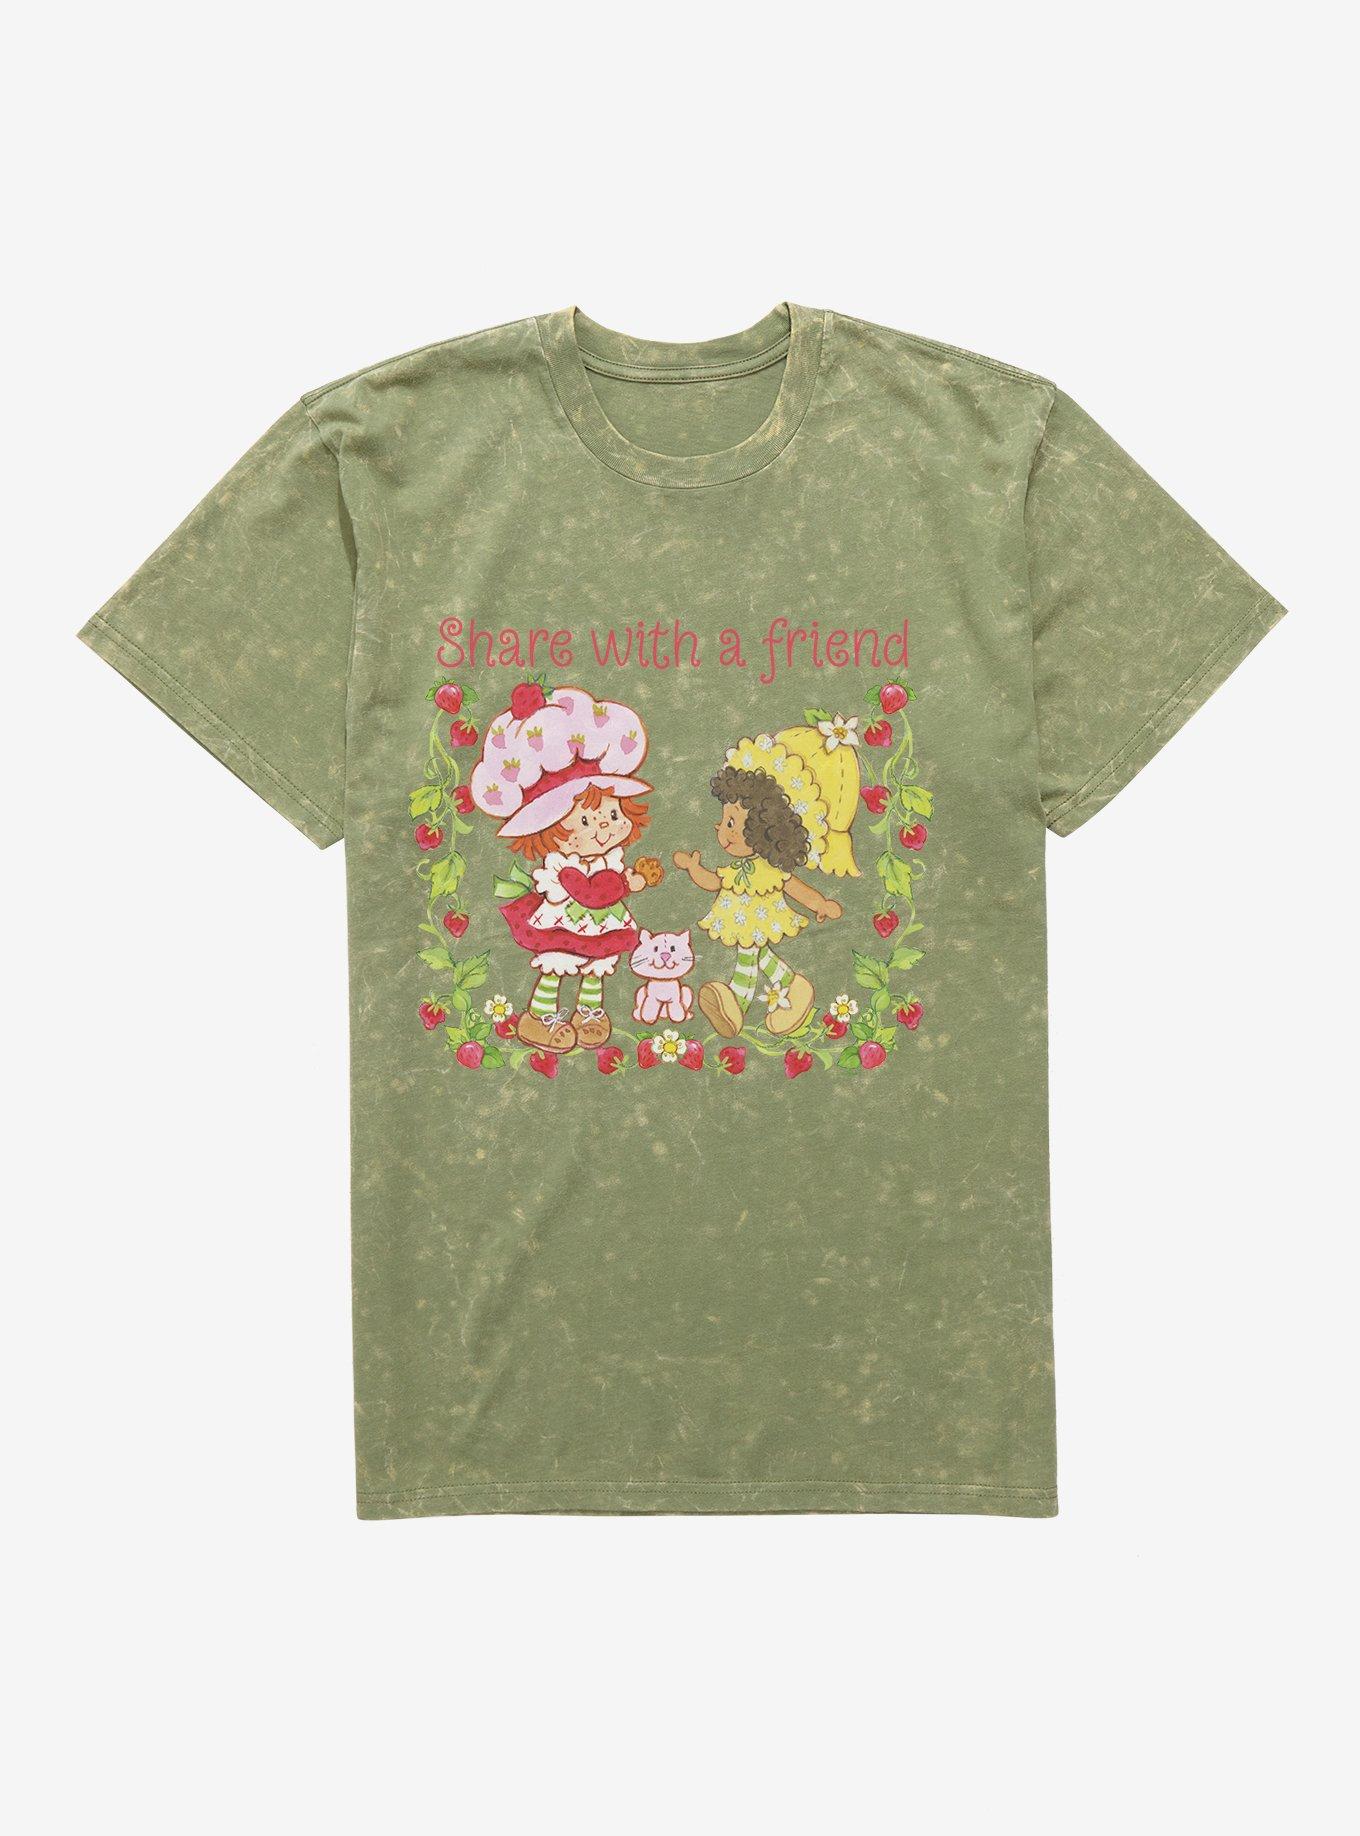 Strawberry Shortcake Share With A Friend Mineral Wash T-Shirt, MILITARY GREEN MINERAL WASH, hi-res